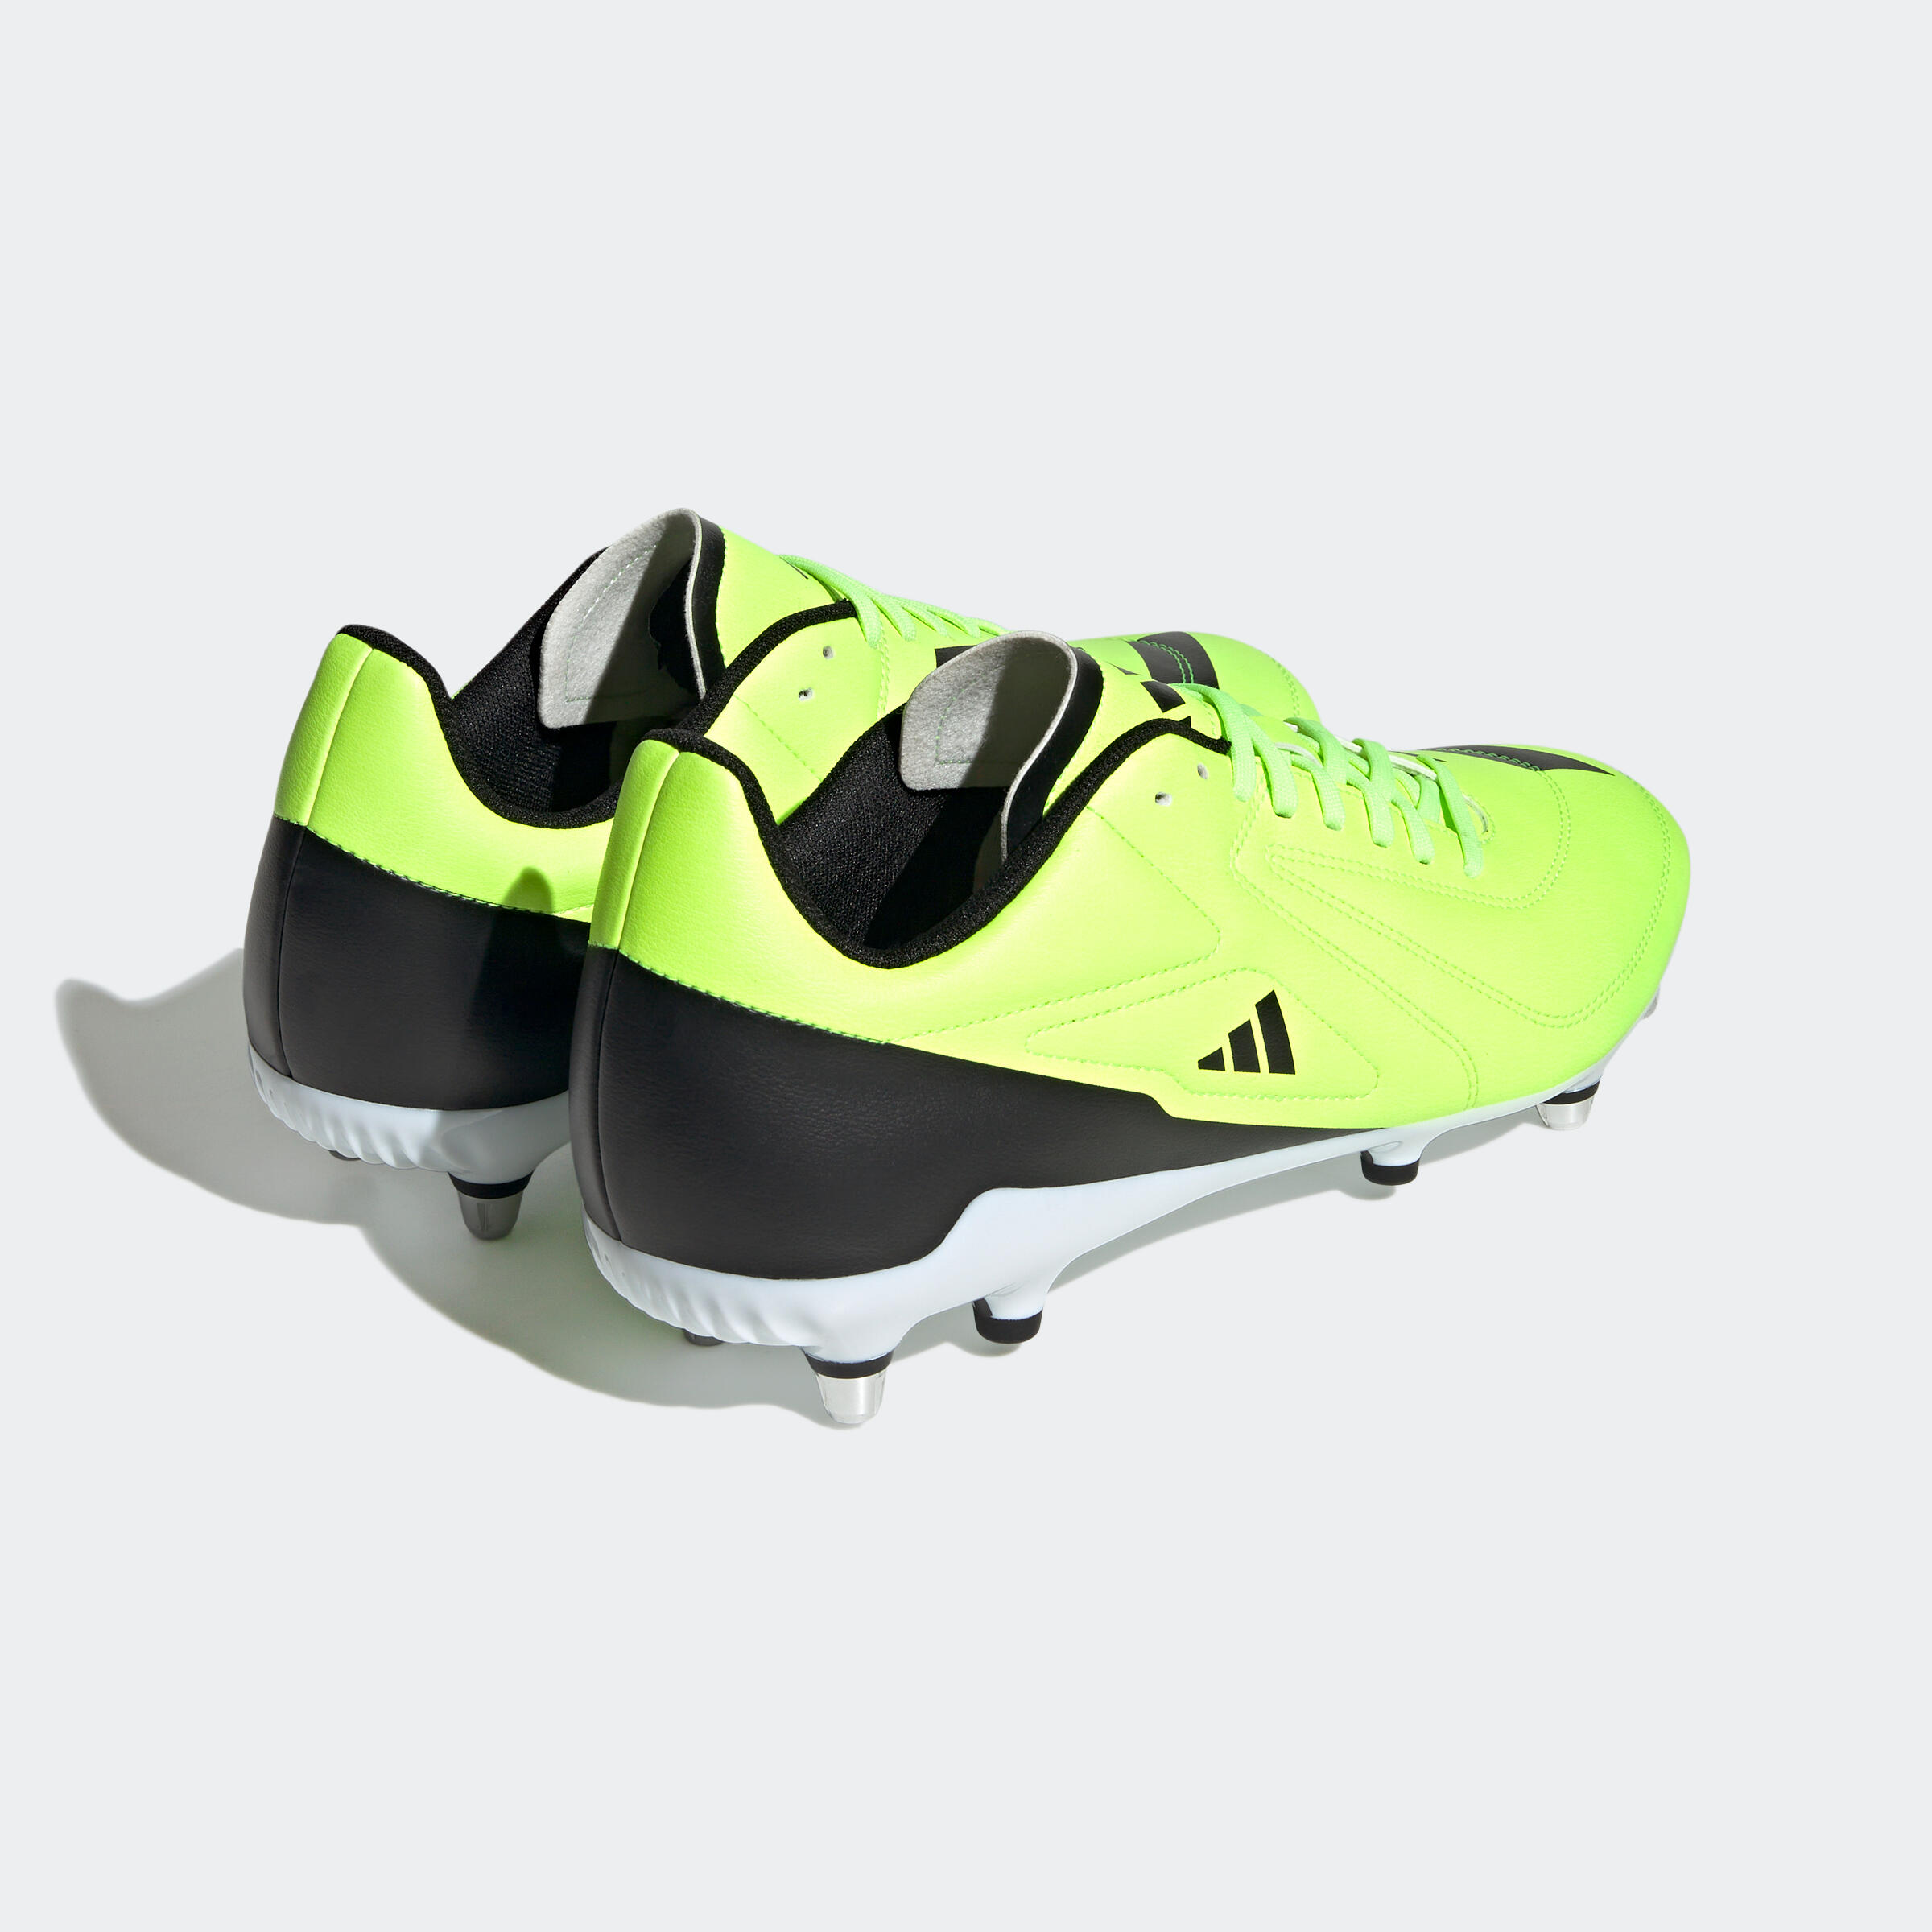 Adult Rugby Boots RS 15 SG Hybrid - Neon Yellow 4/10